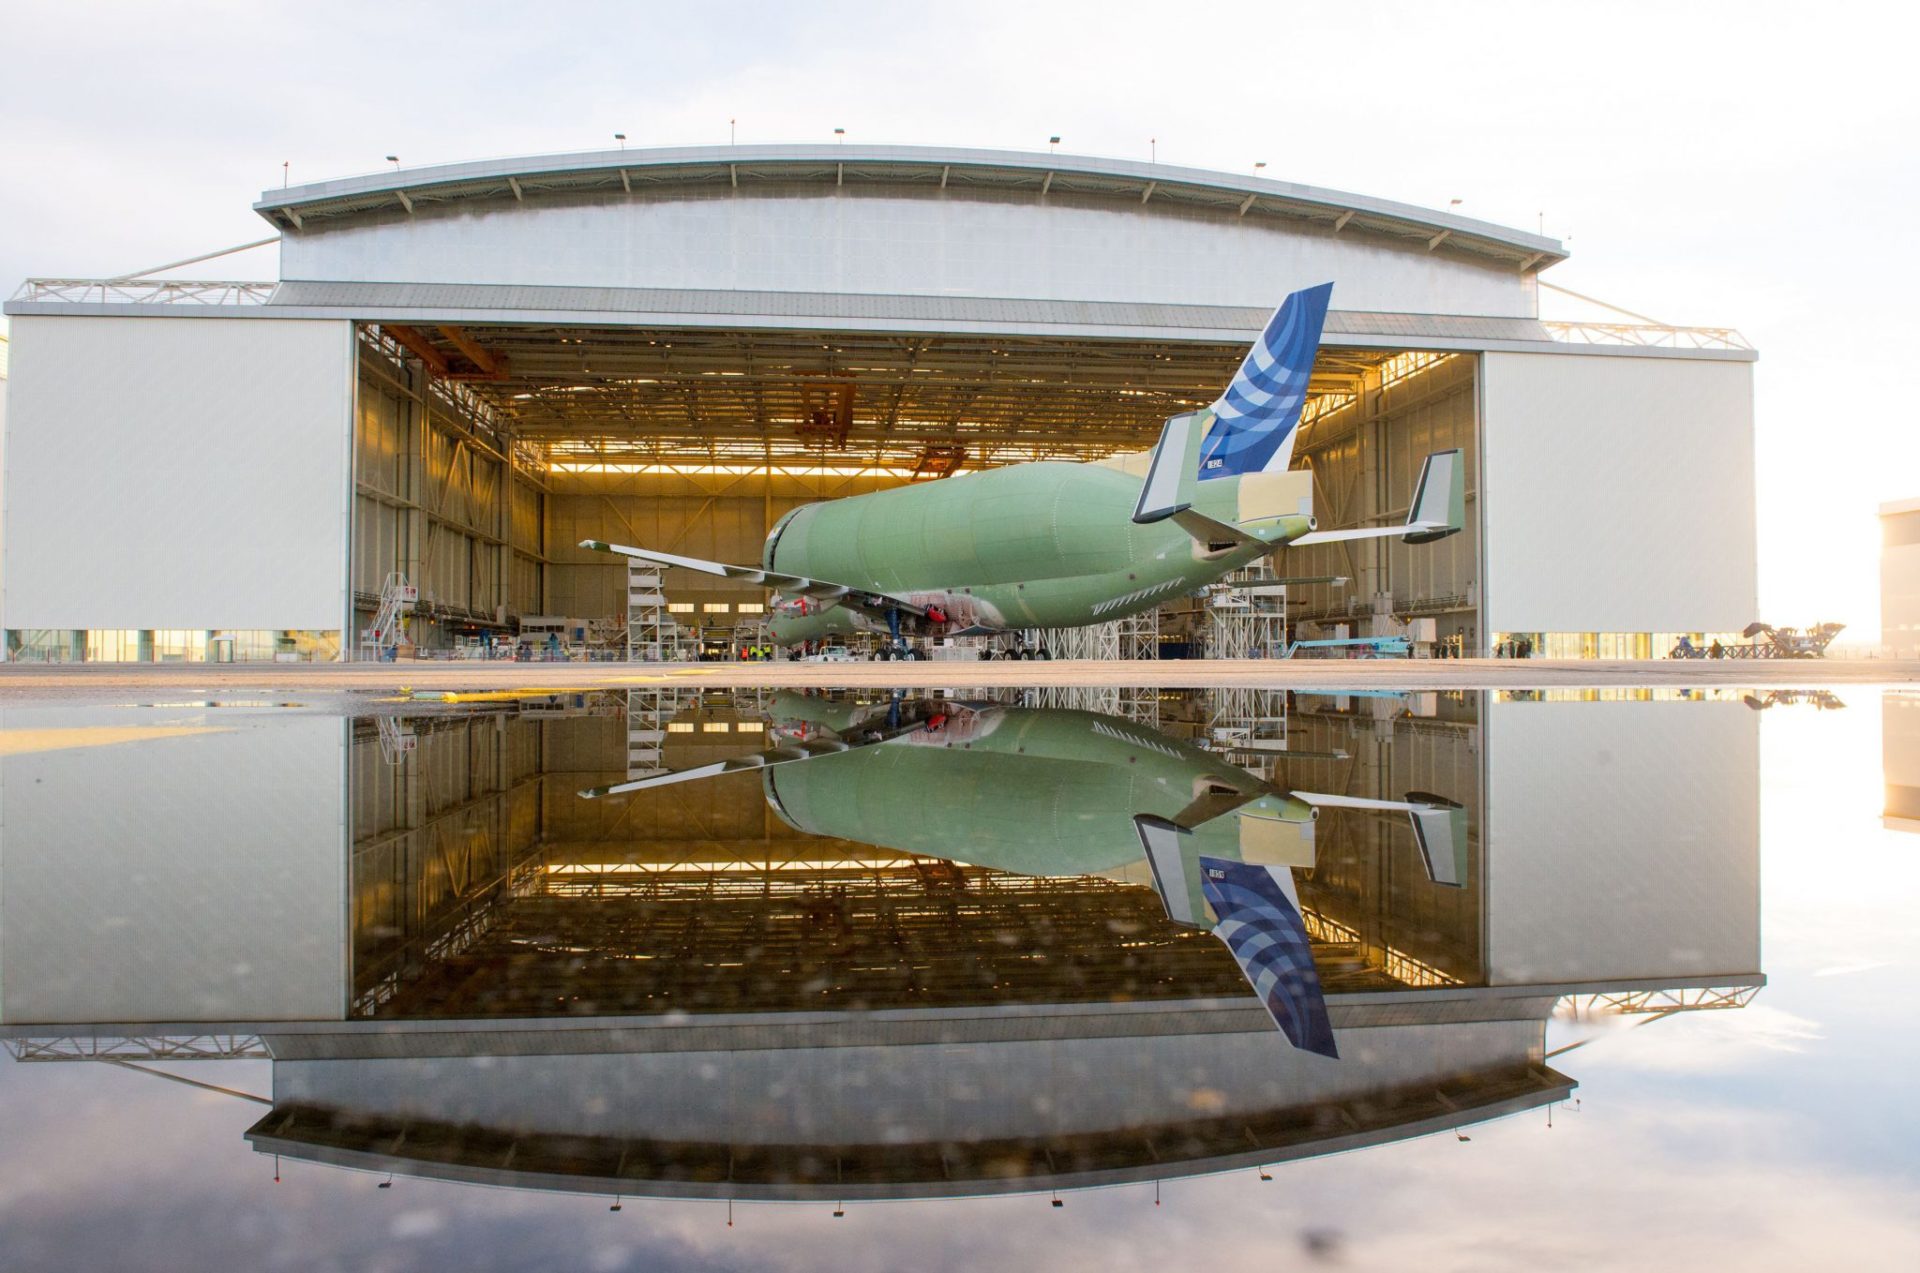 BelugaXL No1 rolls out of the hangar (Image: P.Masclet/Airbus)